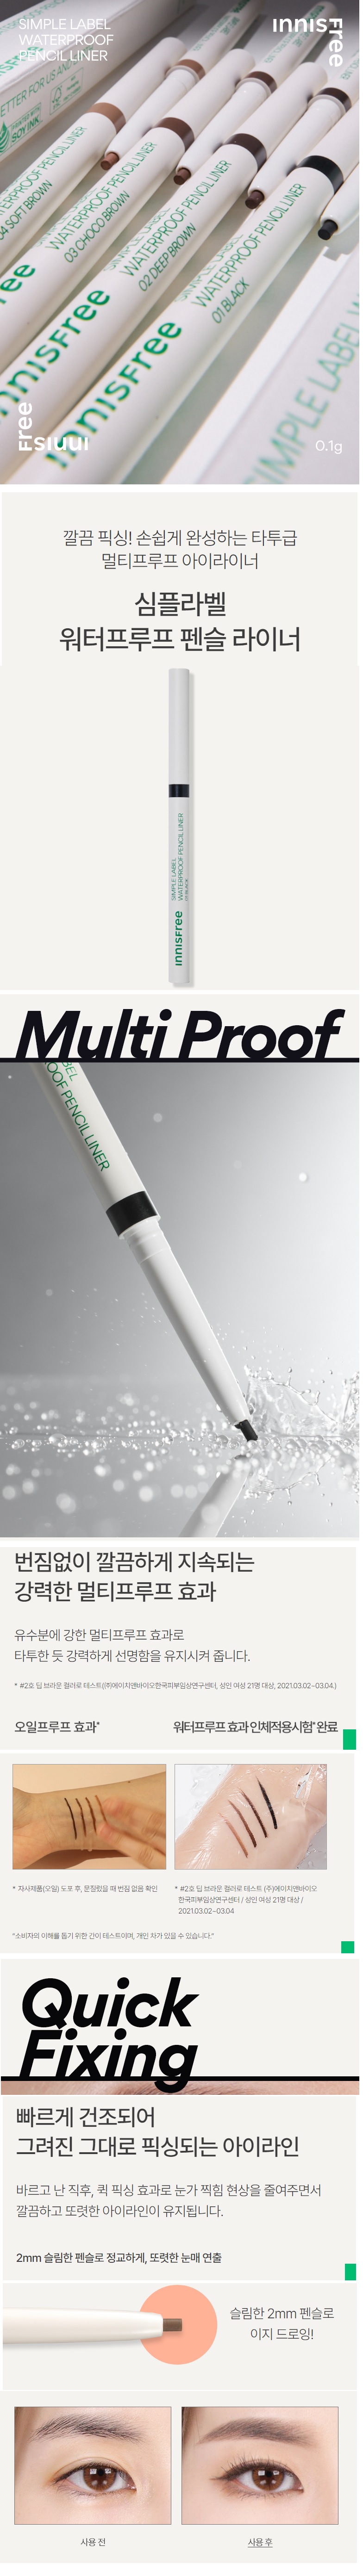 Innisfree Simple Label Waterproof Pencil Liner korean skincare product online shop malaysia china poland1